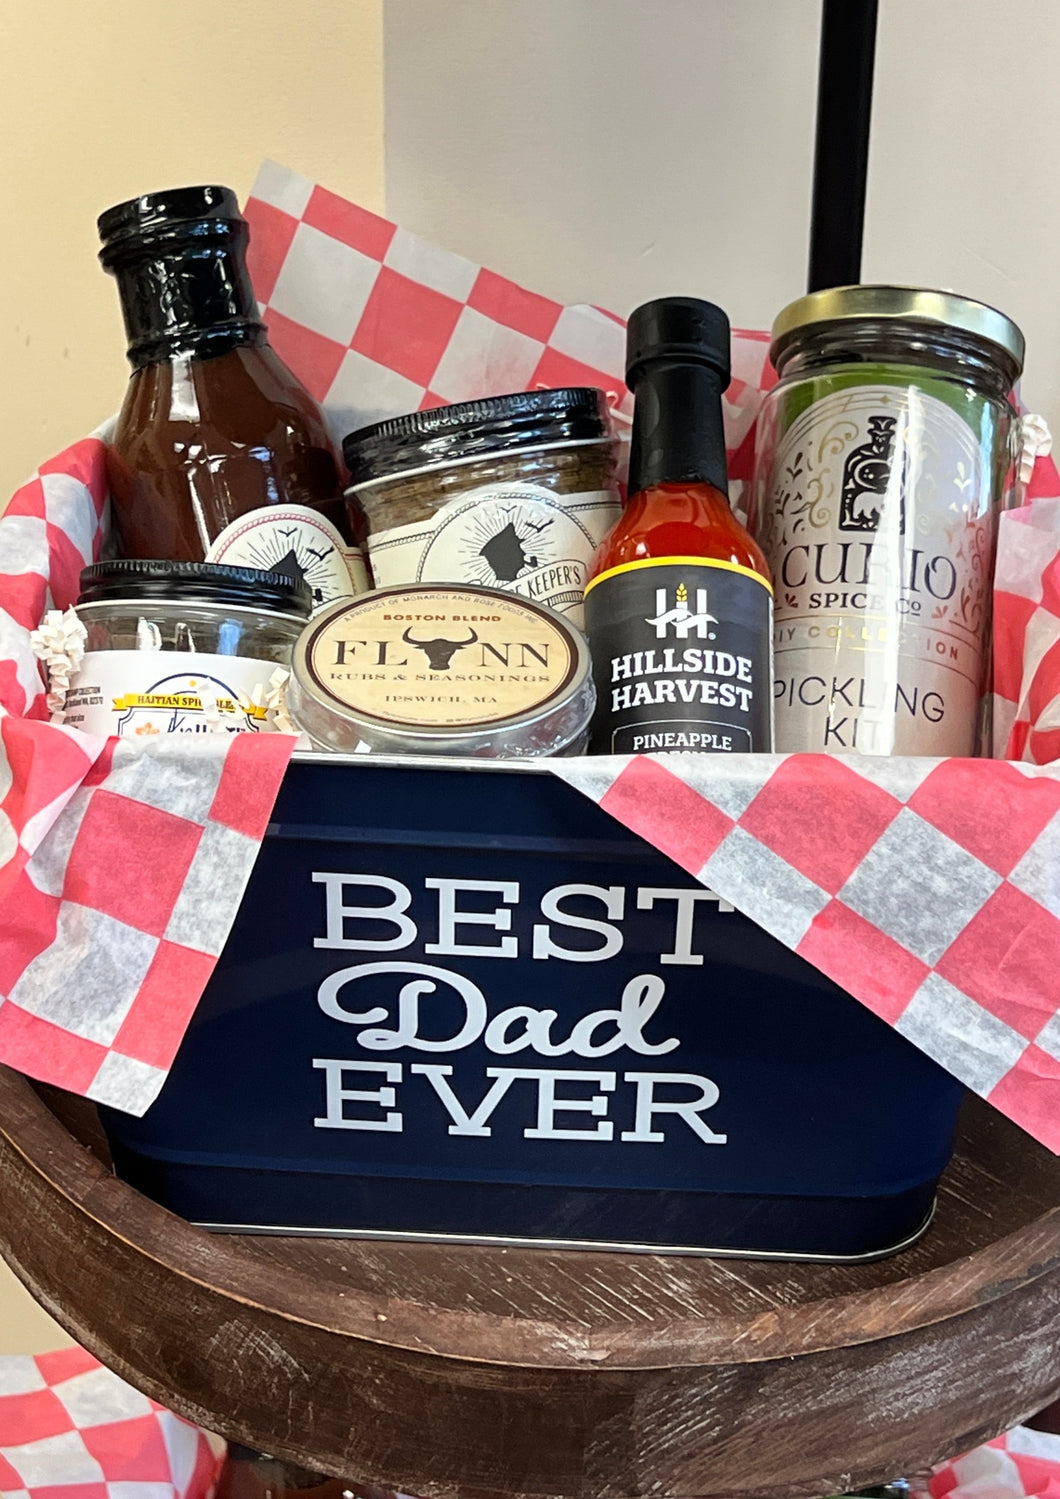 Fire Up the Grill! A Gift Box for the Grill Master